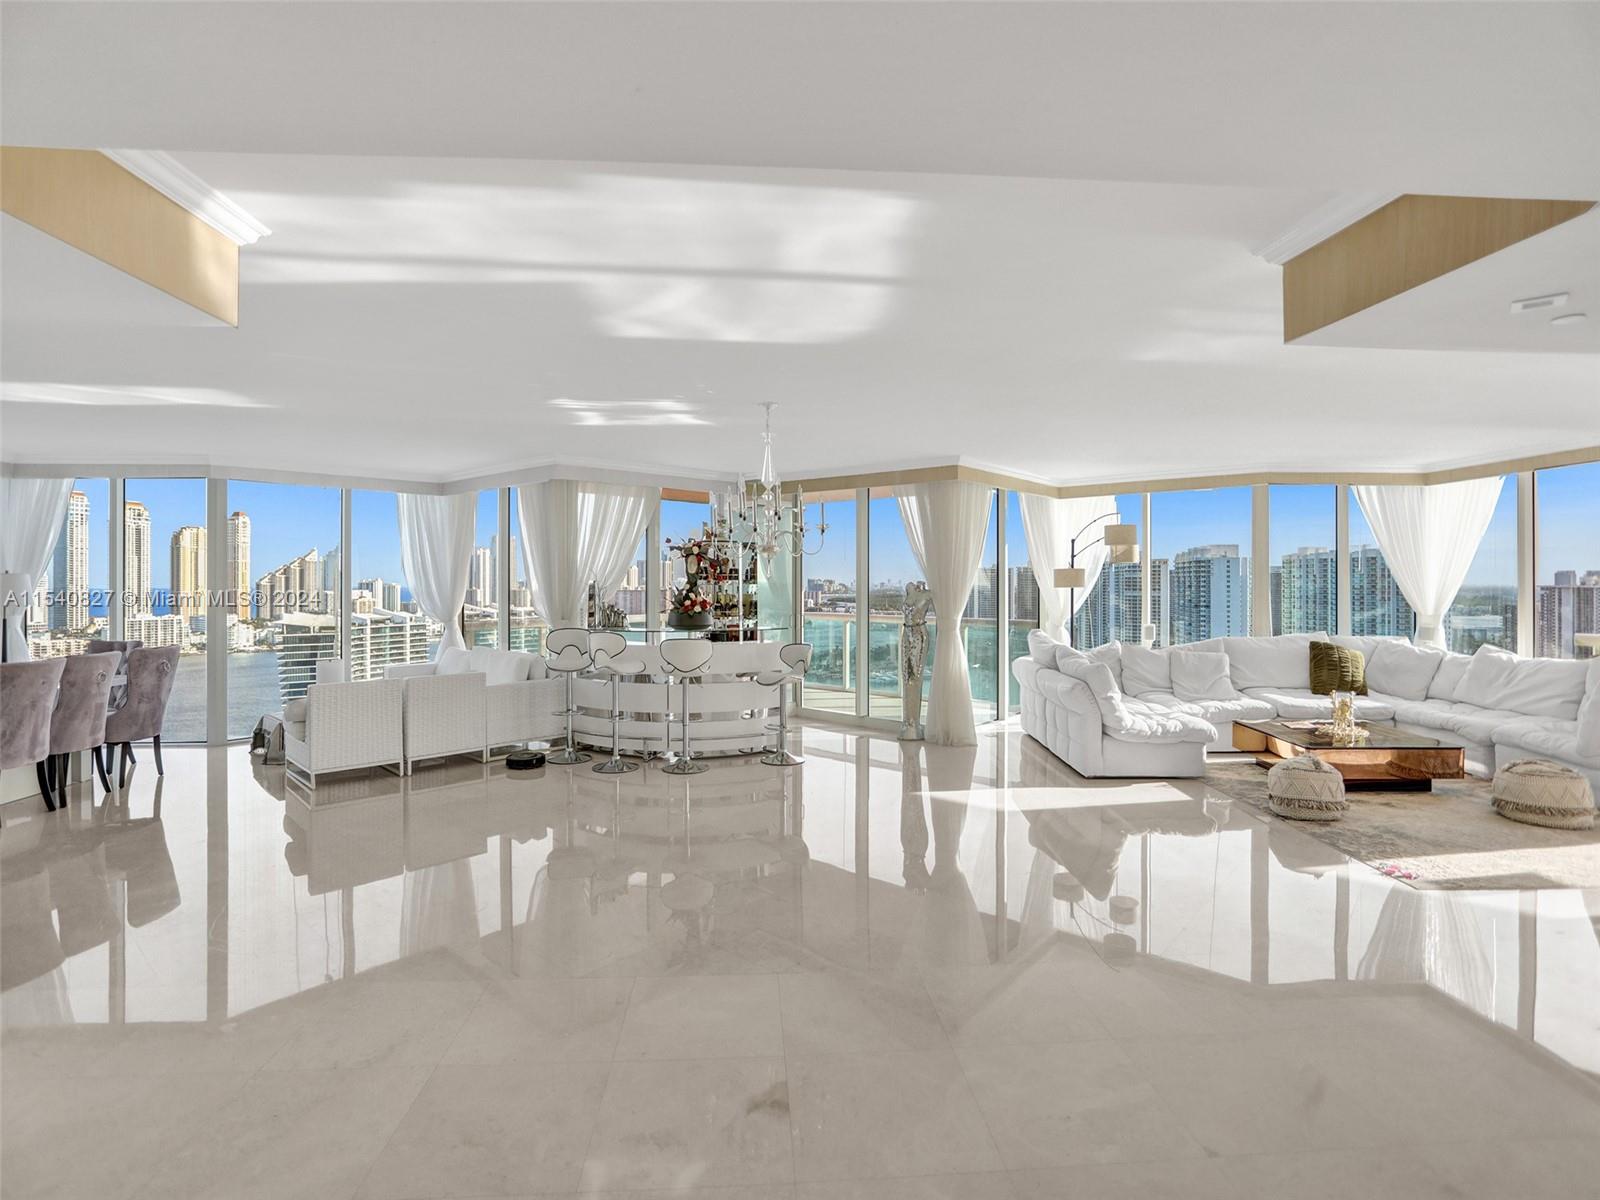 Extraordinary 28th floor PH, this one-of-a-kind 4-bedroom, 4.5-bath Aventura Penthouse presents an exceptional fusion of luxury and location. Offering breathtaking sunrise-to-sunset views of the Atlantic Ocean and the serene Intracoastal, this one-of-a-kind residence boasts the luxury of a private elevator, an open floor plan adorned with high-end finishes, Walk-in closets, and elegant marble flooring. Rarely available, this Penthouse comes with 3 parking spaces in the garage. The complex offers an array of amenities, from tennis courts, and a pool,  to a private marina and a bustling clubhouse, all securely gated. Immediate proximity to the renowned Aventura Mall, ocean, fine dining, and shopping adds to the allure, making this an unparalleled opportunity to experience life at its best.